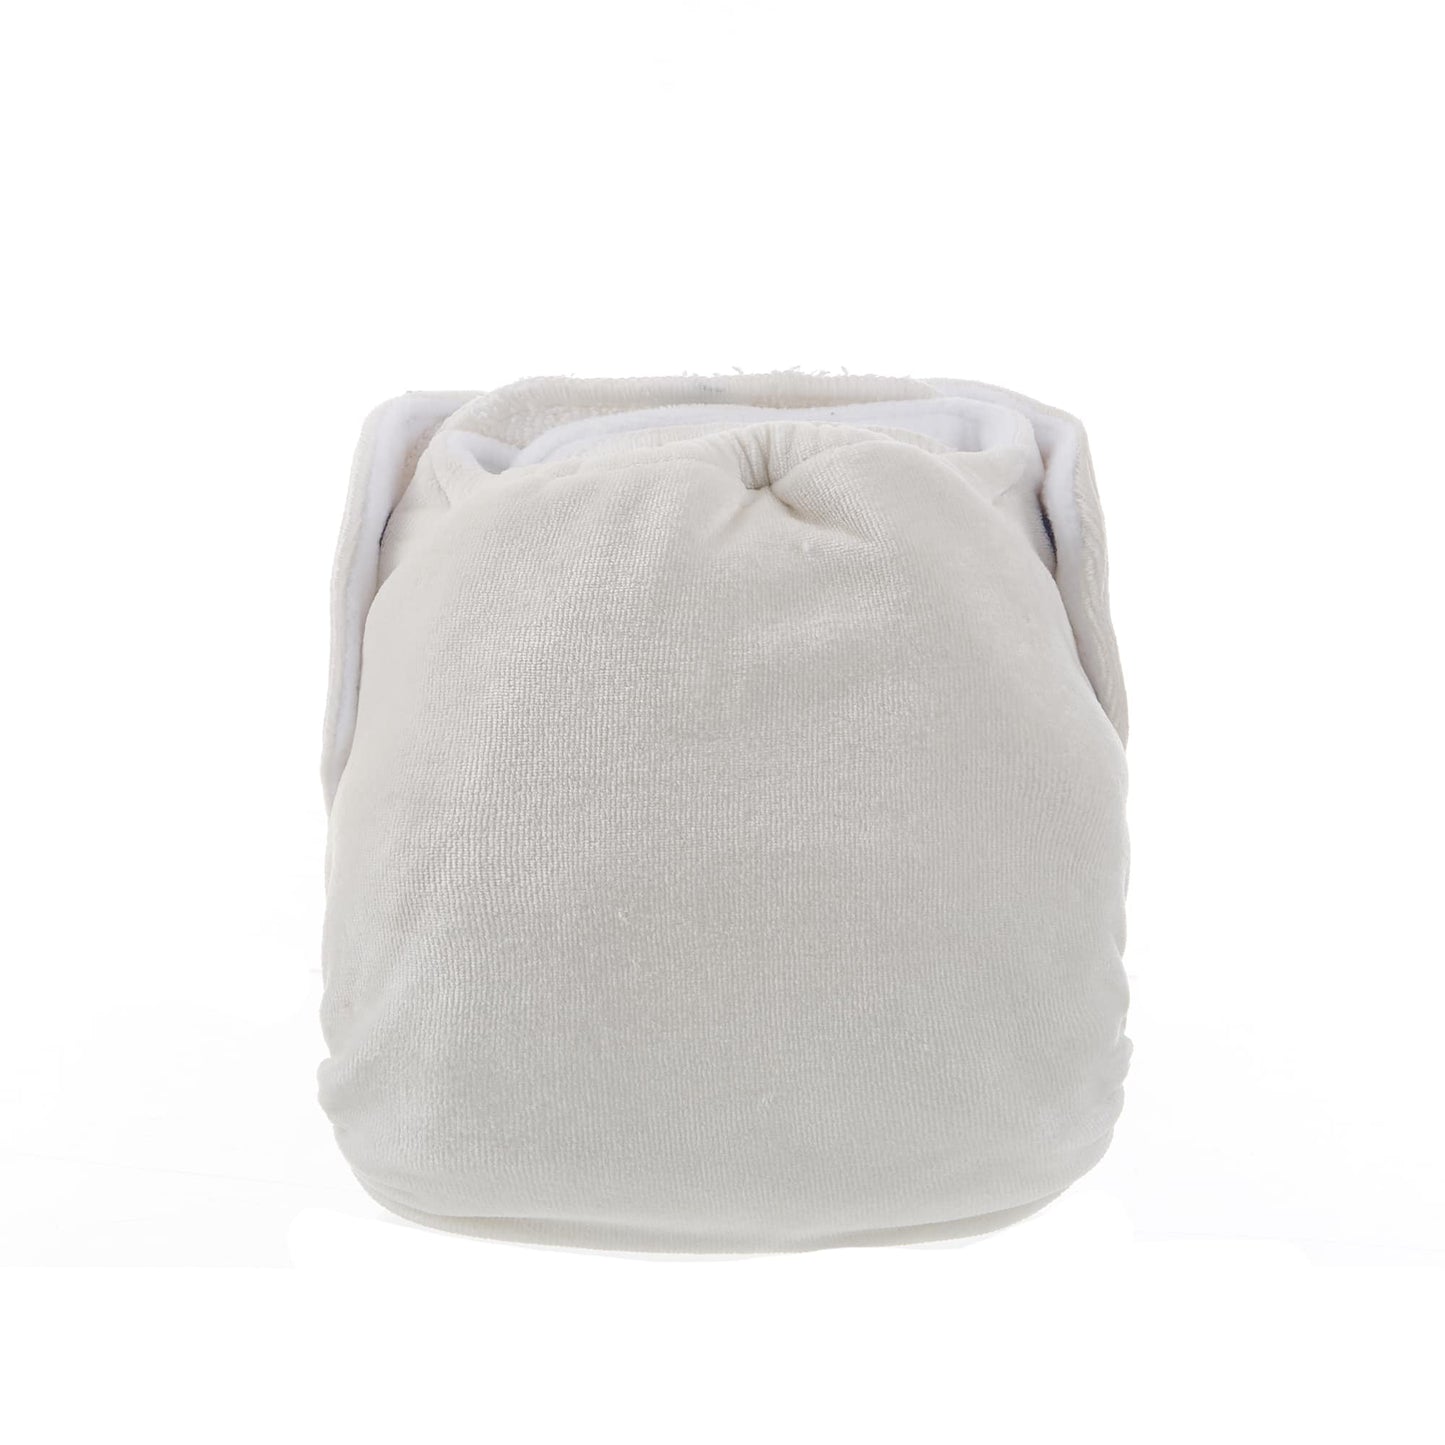 Image showing back of fitted nappy.